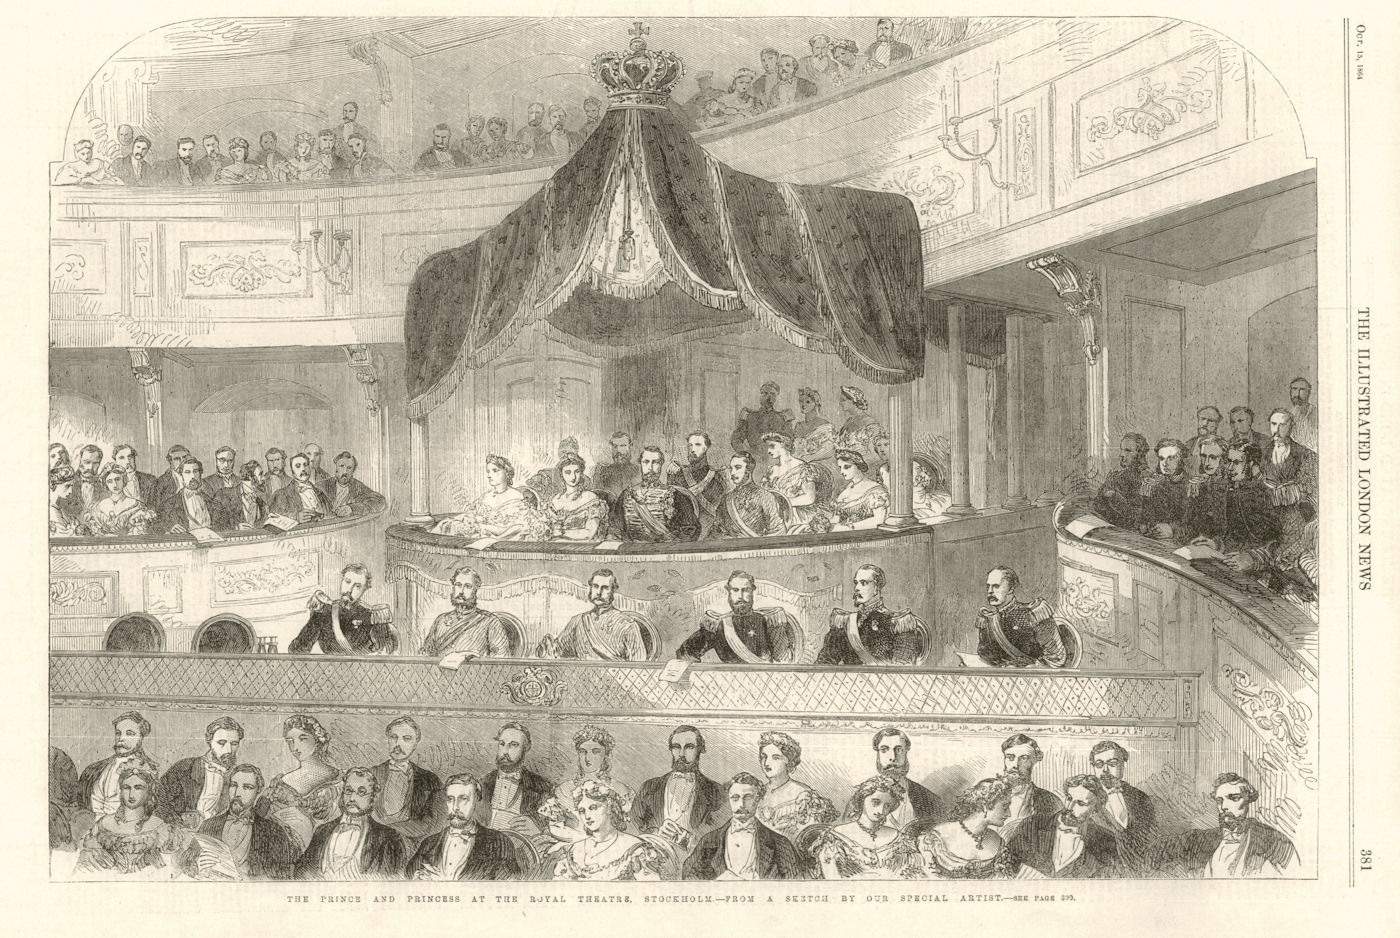 Associate Product The Prince & Princess at the Royal Dramatic Theatre, Stockholm. Sweden 1864